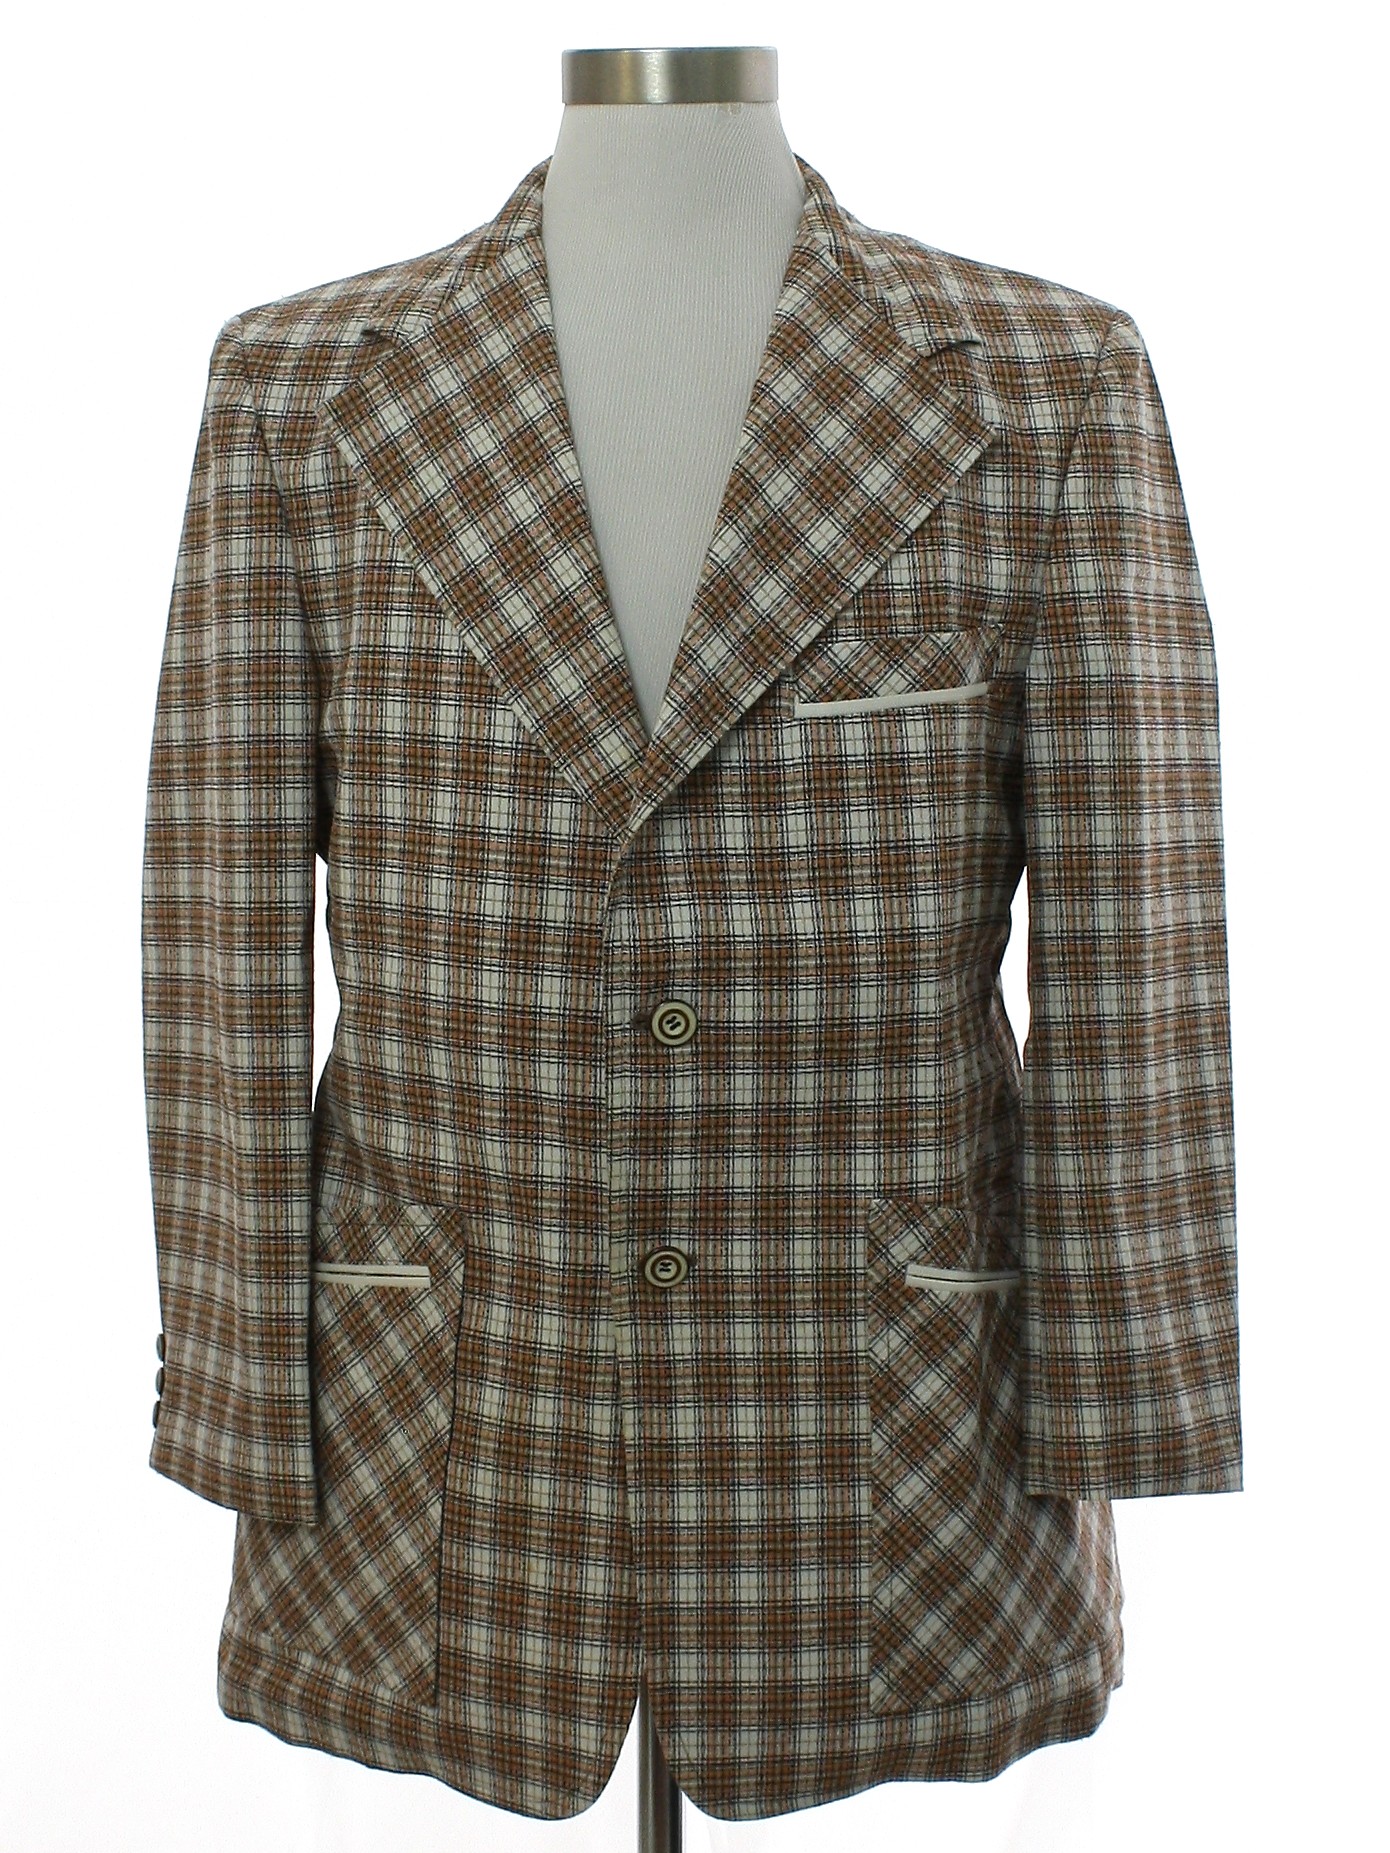 Vintage 70s Jacket: 70s -His- Mens earthtone shaded tan, brown, white ...